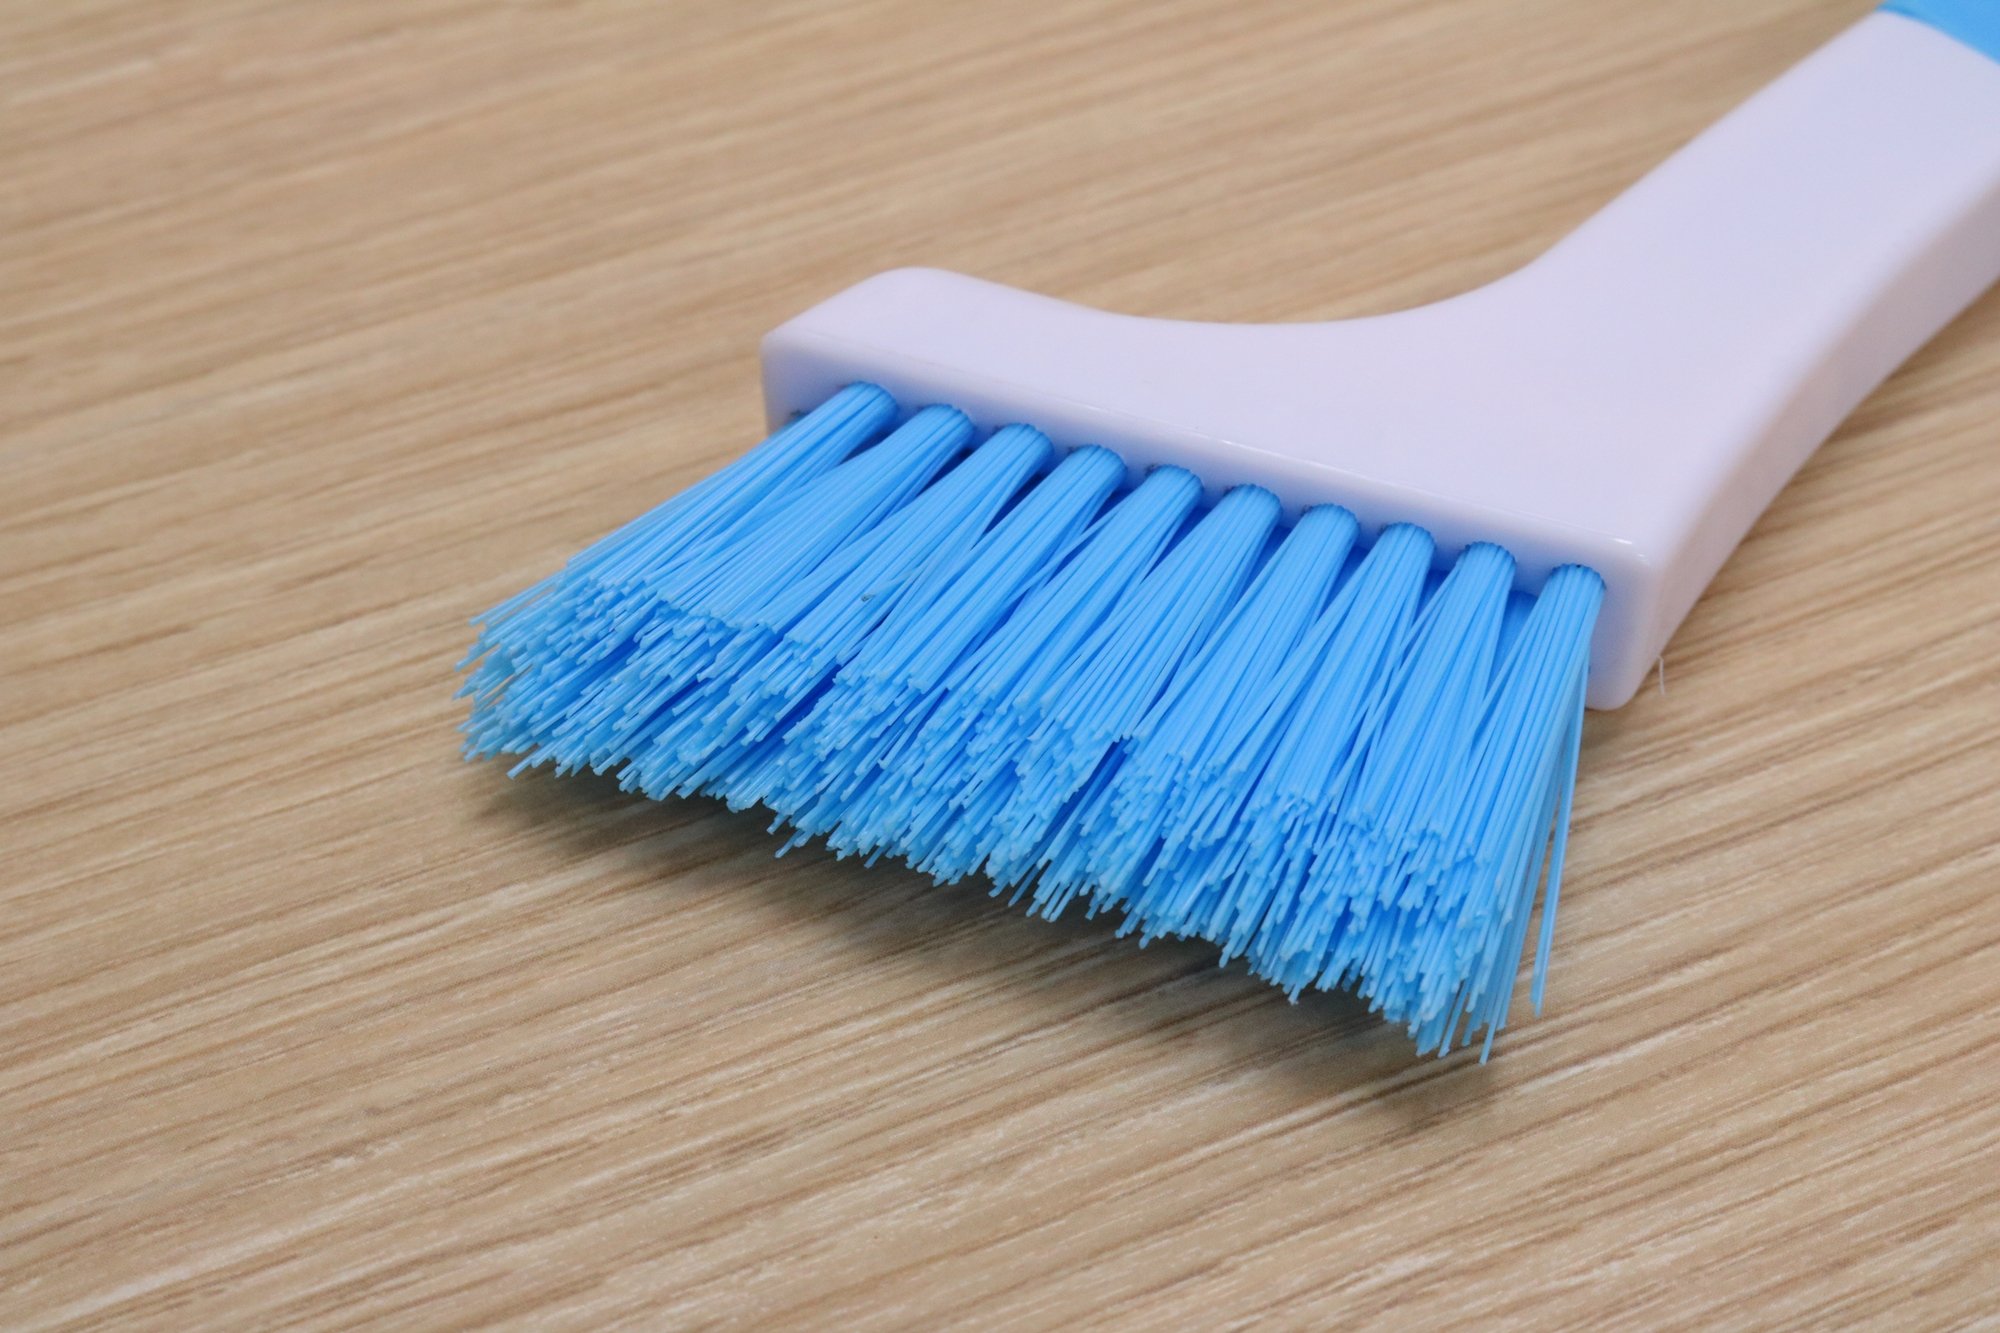 Kokubo 3572 Kokubo Kokubo Convenient for Cleaning Tile Joints and Door Gaps Cleaning Dr. All-Purpose Brush (Mini Brush Included)